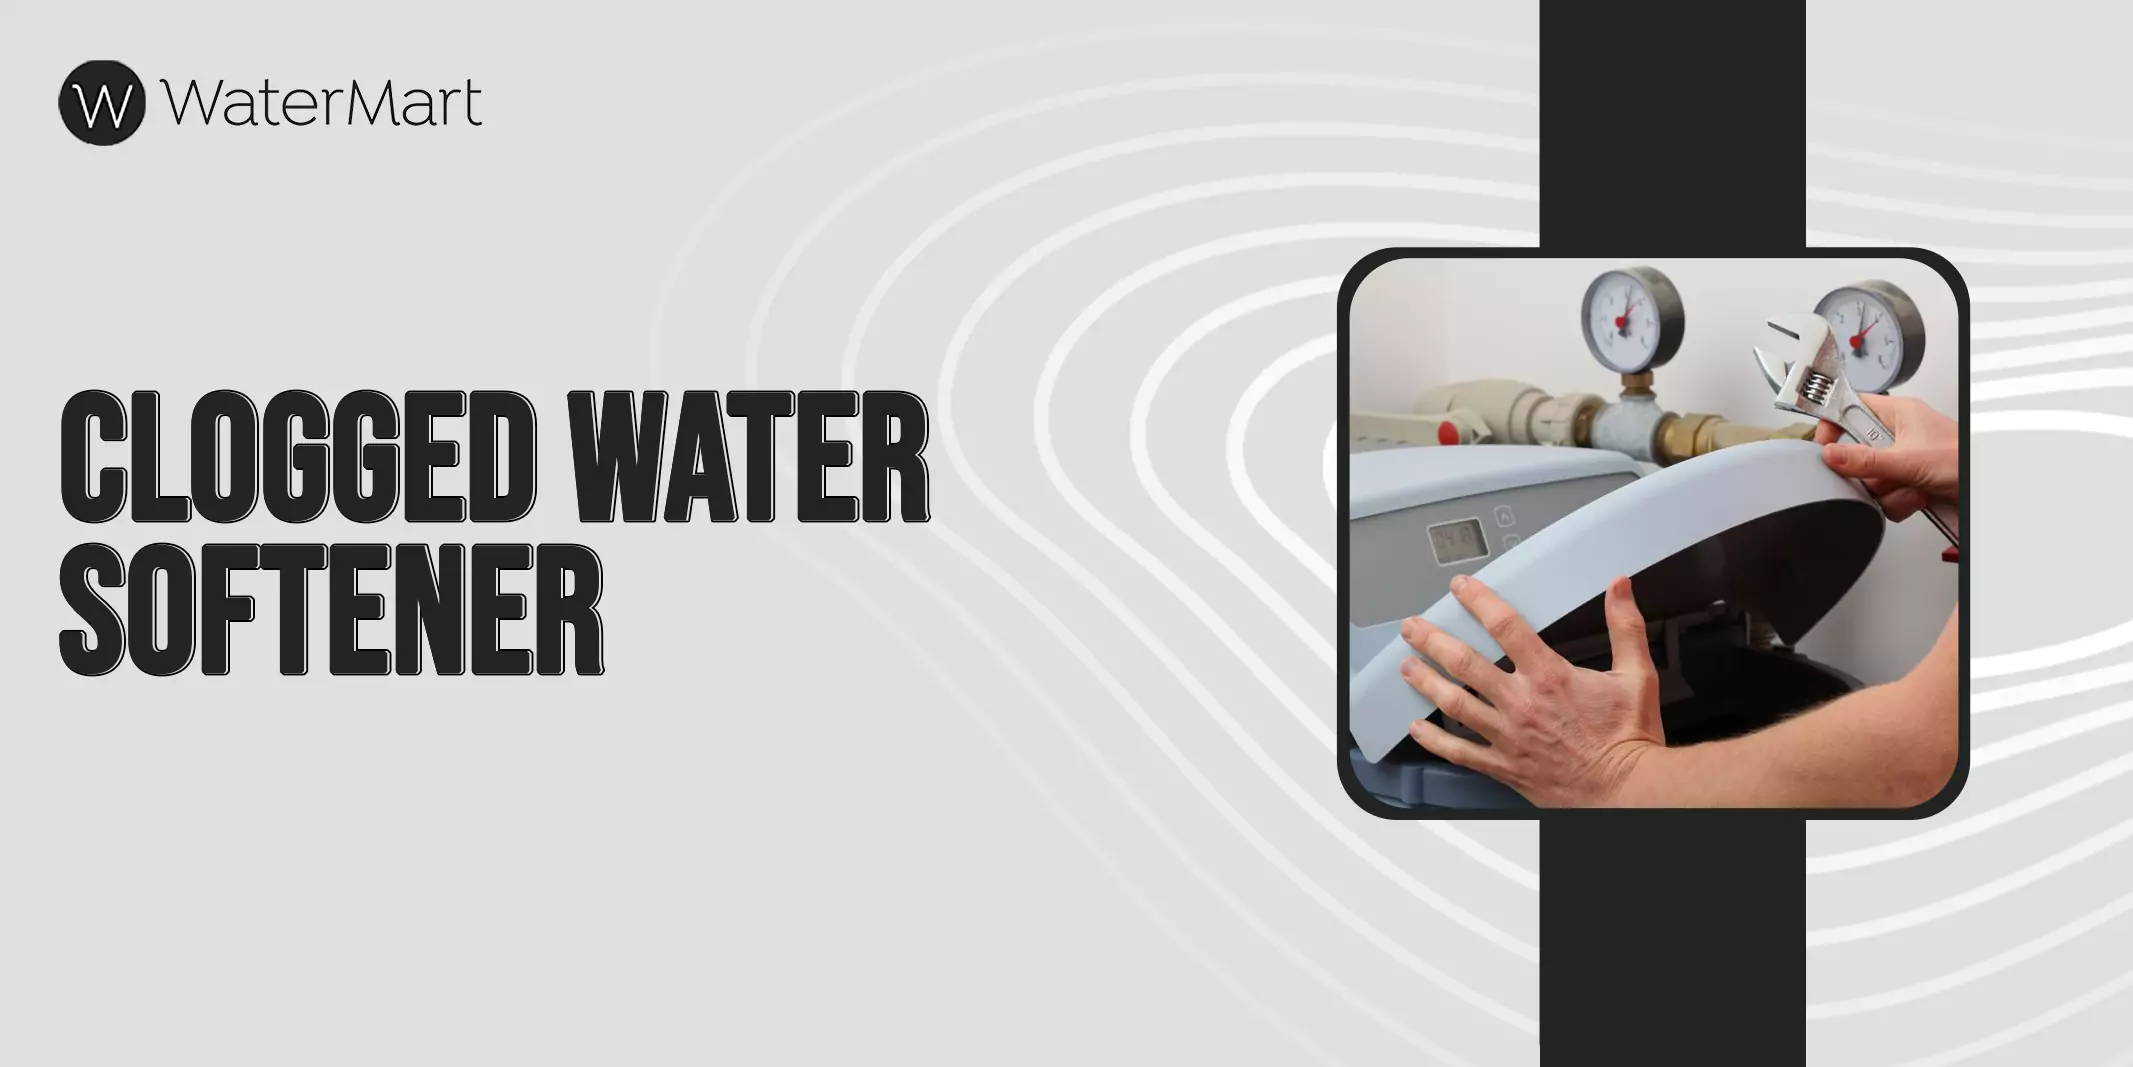 Water Softener Clogged—What Should You Do?